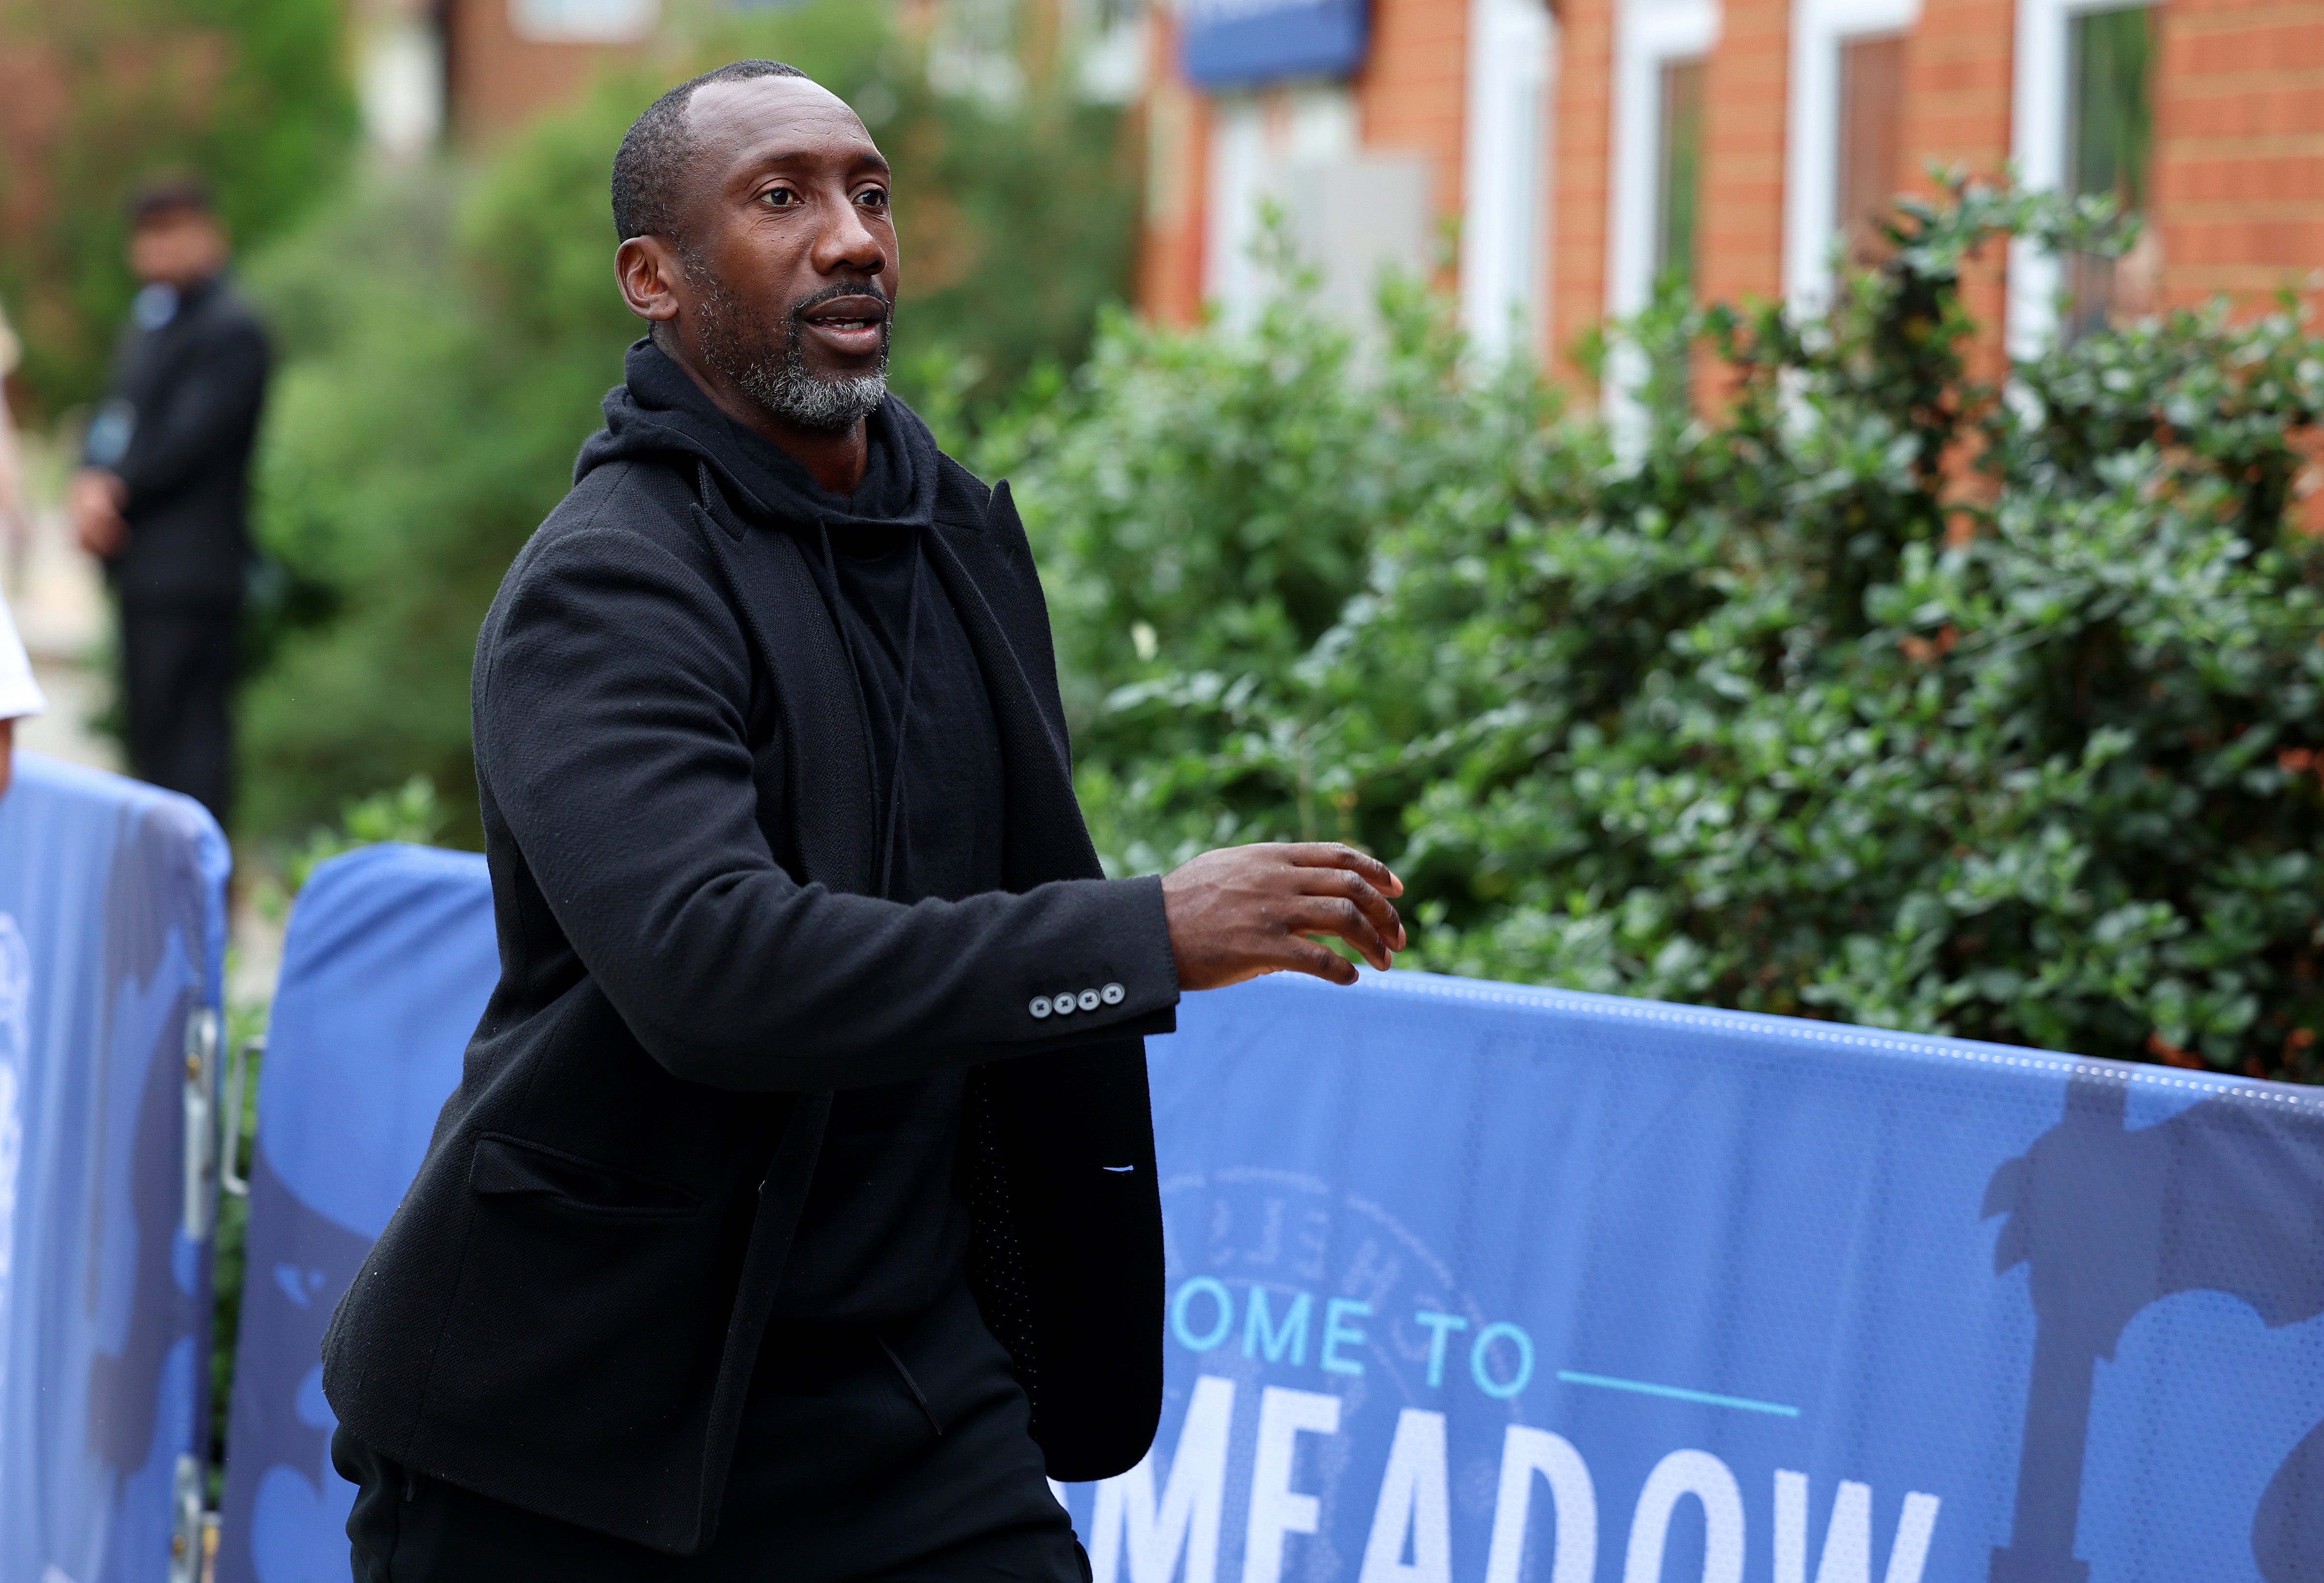 Former Netherlands and Chelsea football player Jimmy Floyd Hasselbaink complained in 2020 about the same display